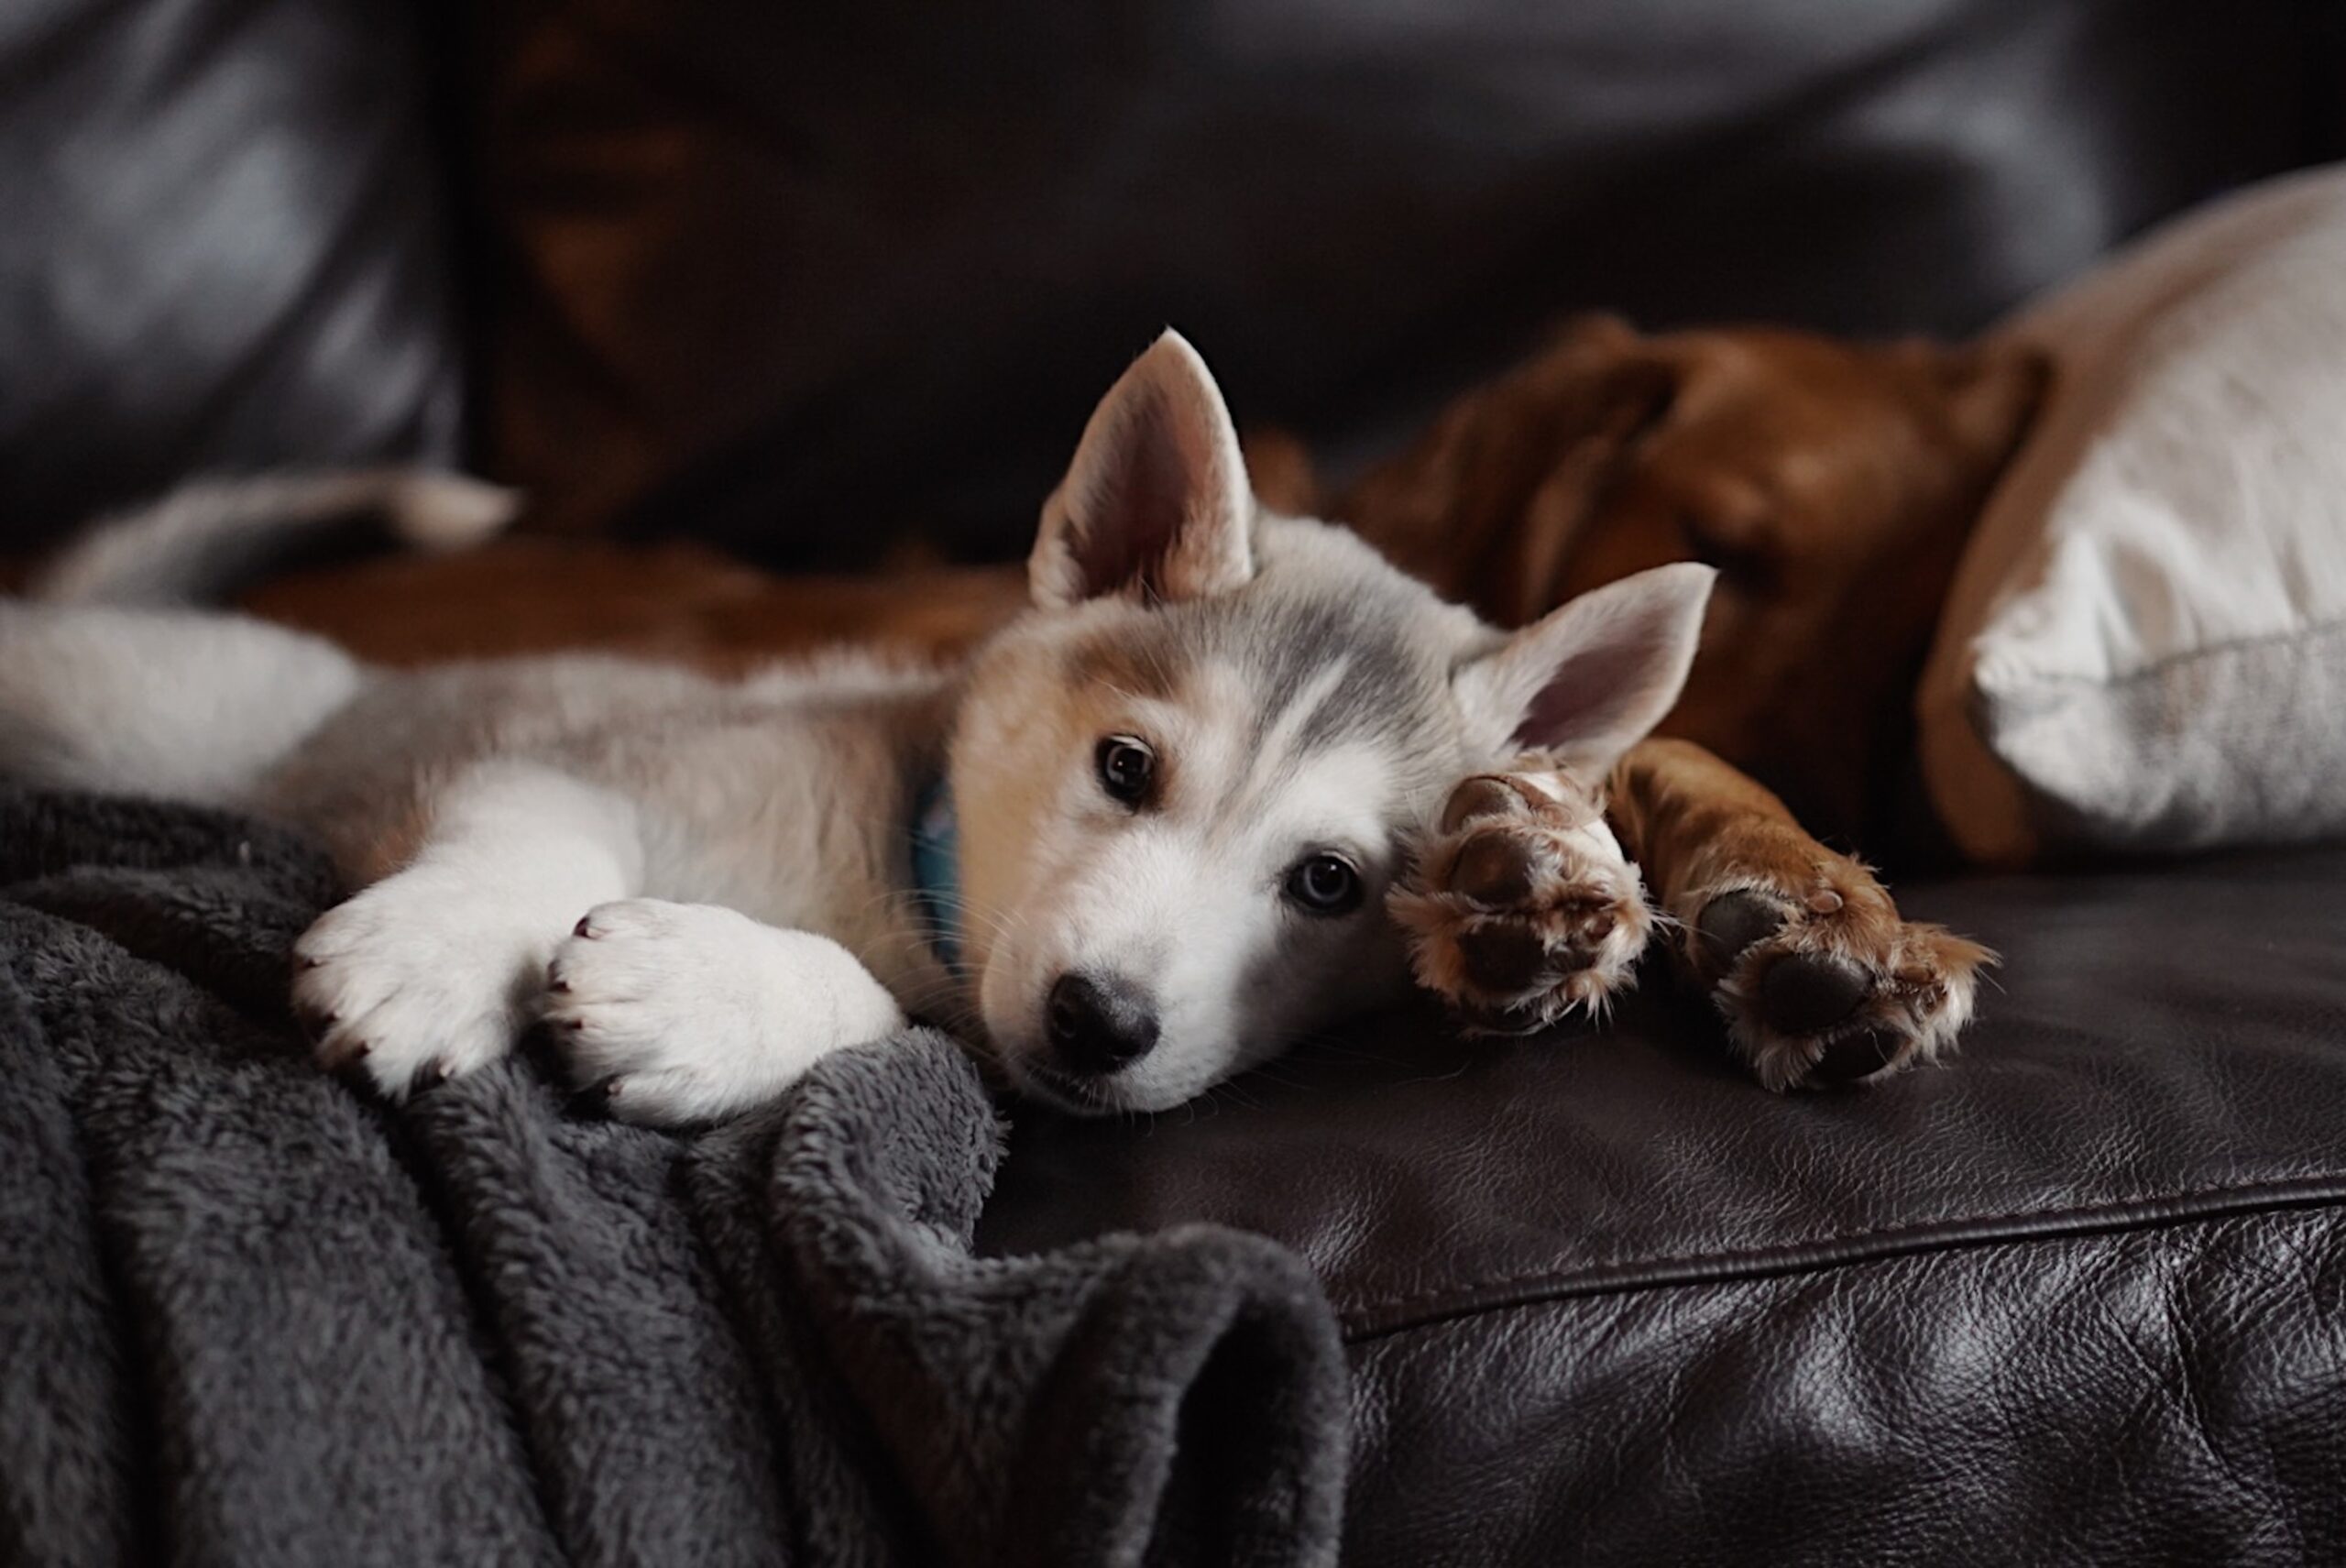 Domestic cute Czechoslovakian husky puppy laying with an adult Golden Retriever on a couch